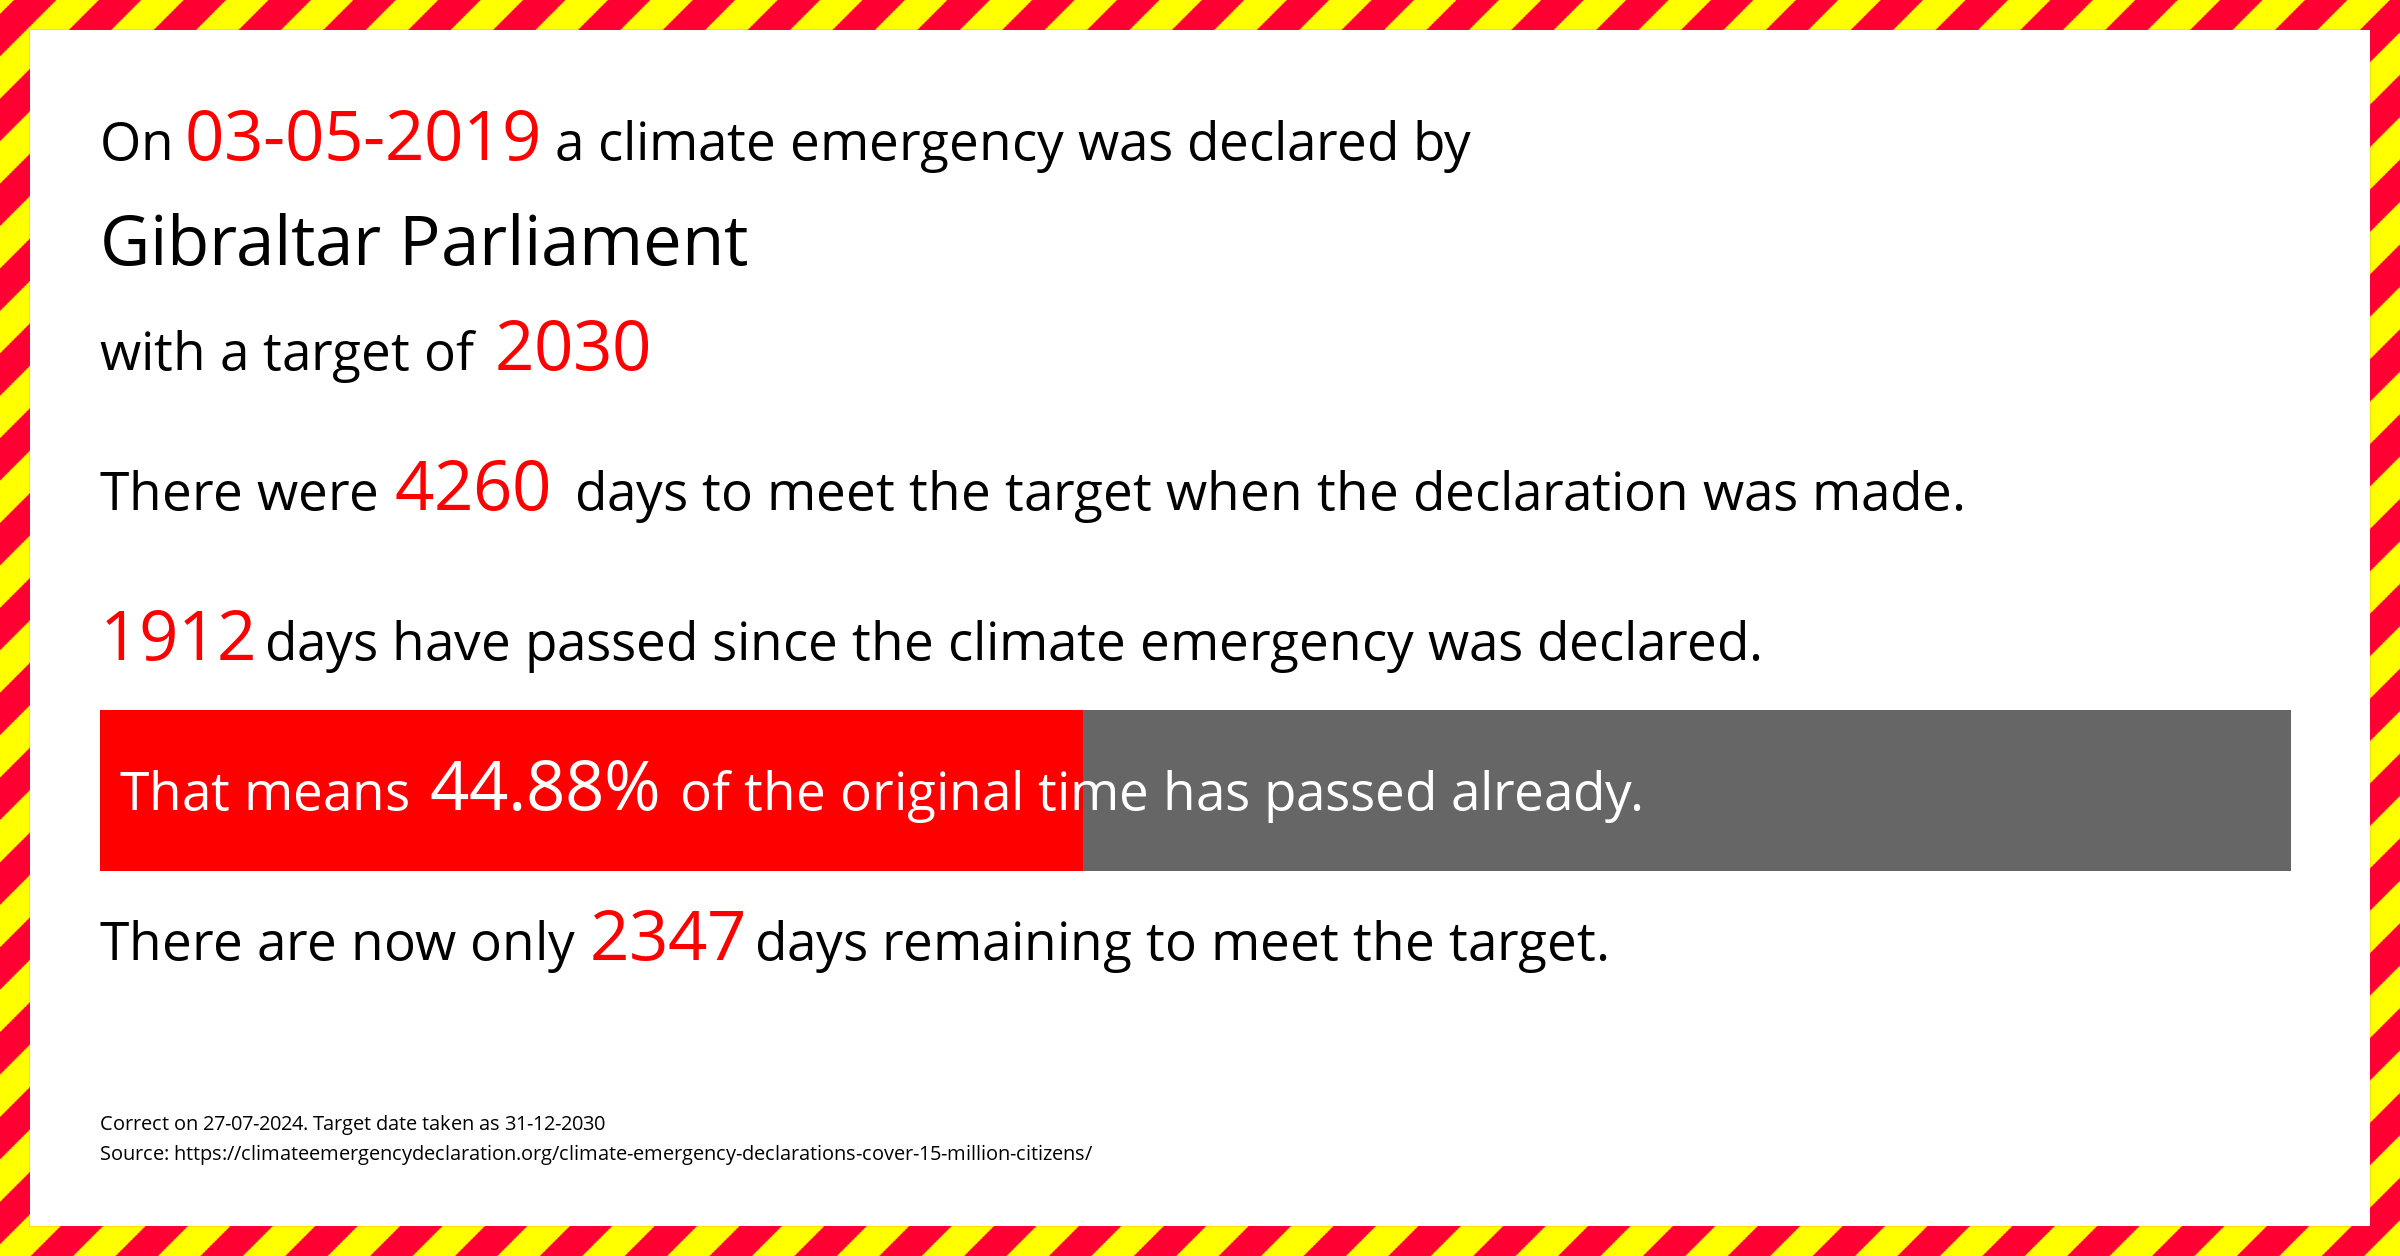 Gibraltar Parliament declared a Climate emergency on Friday 3rd May 2019, with a target of 2030.